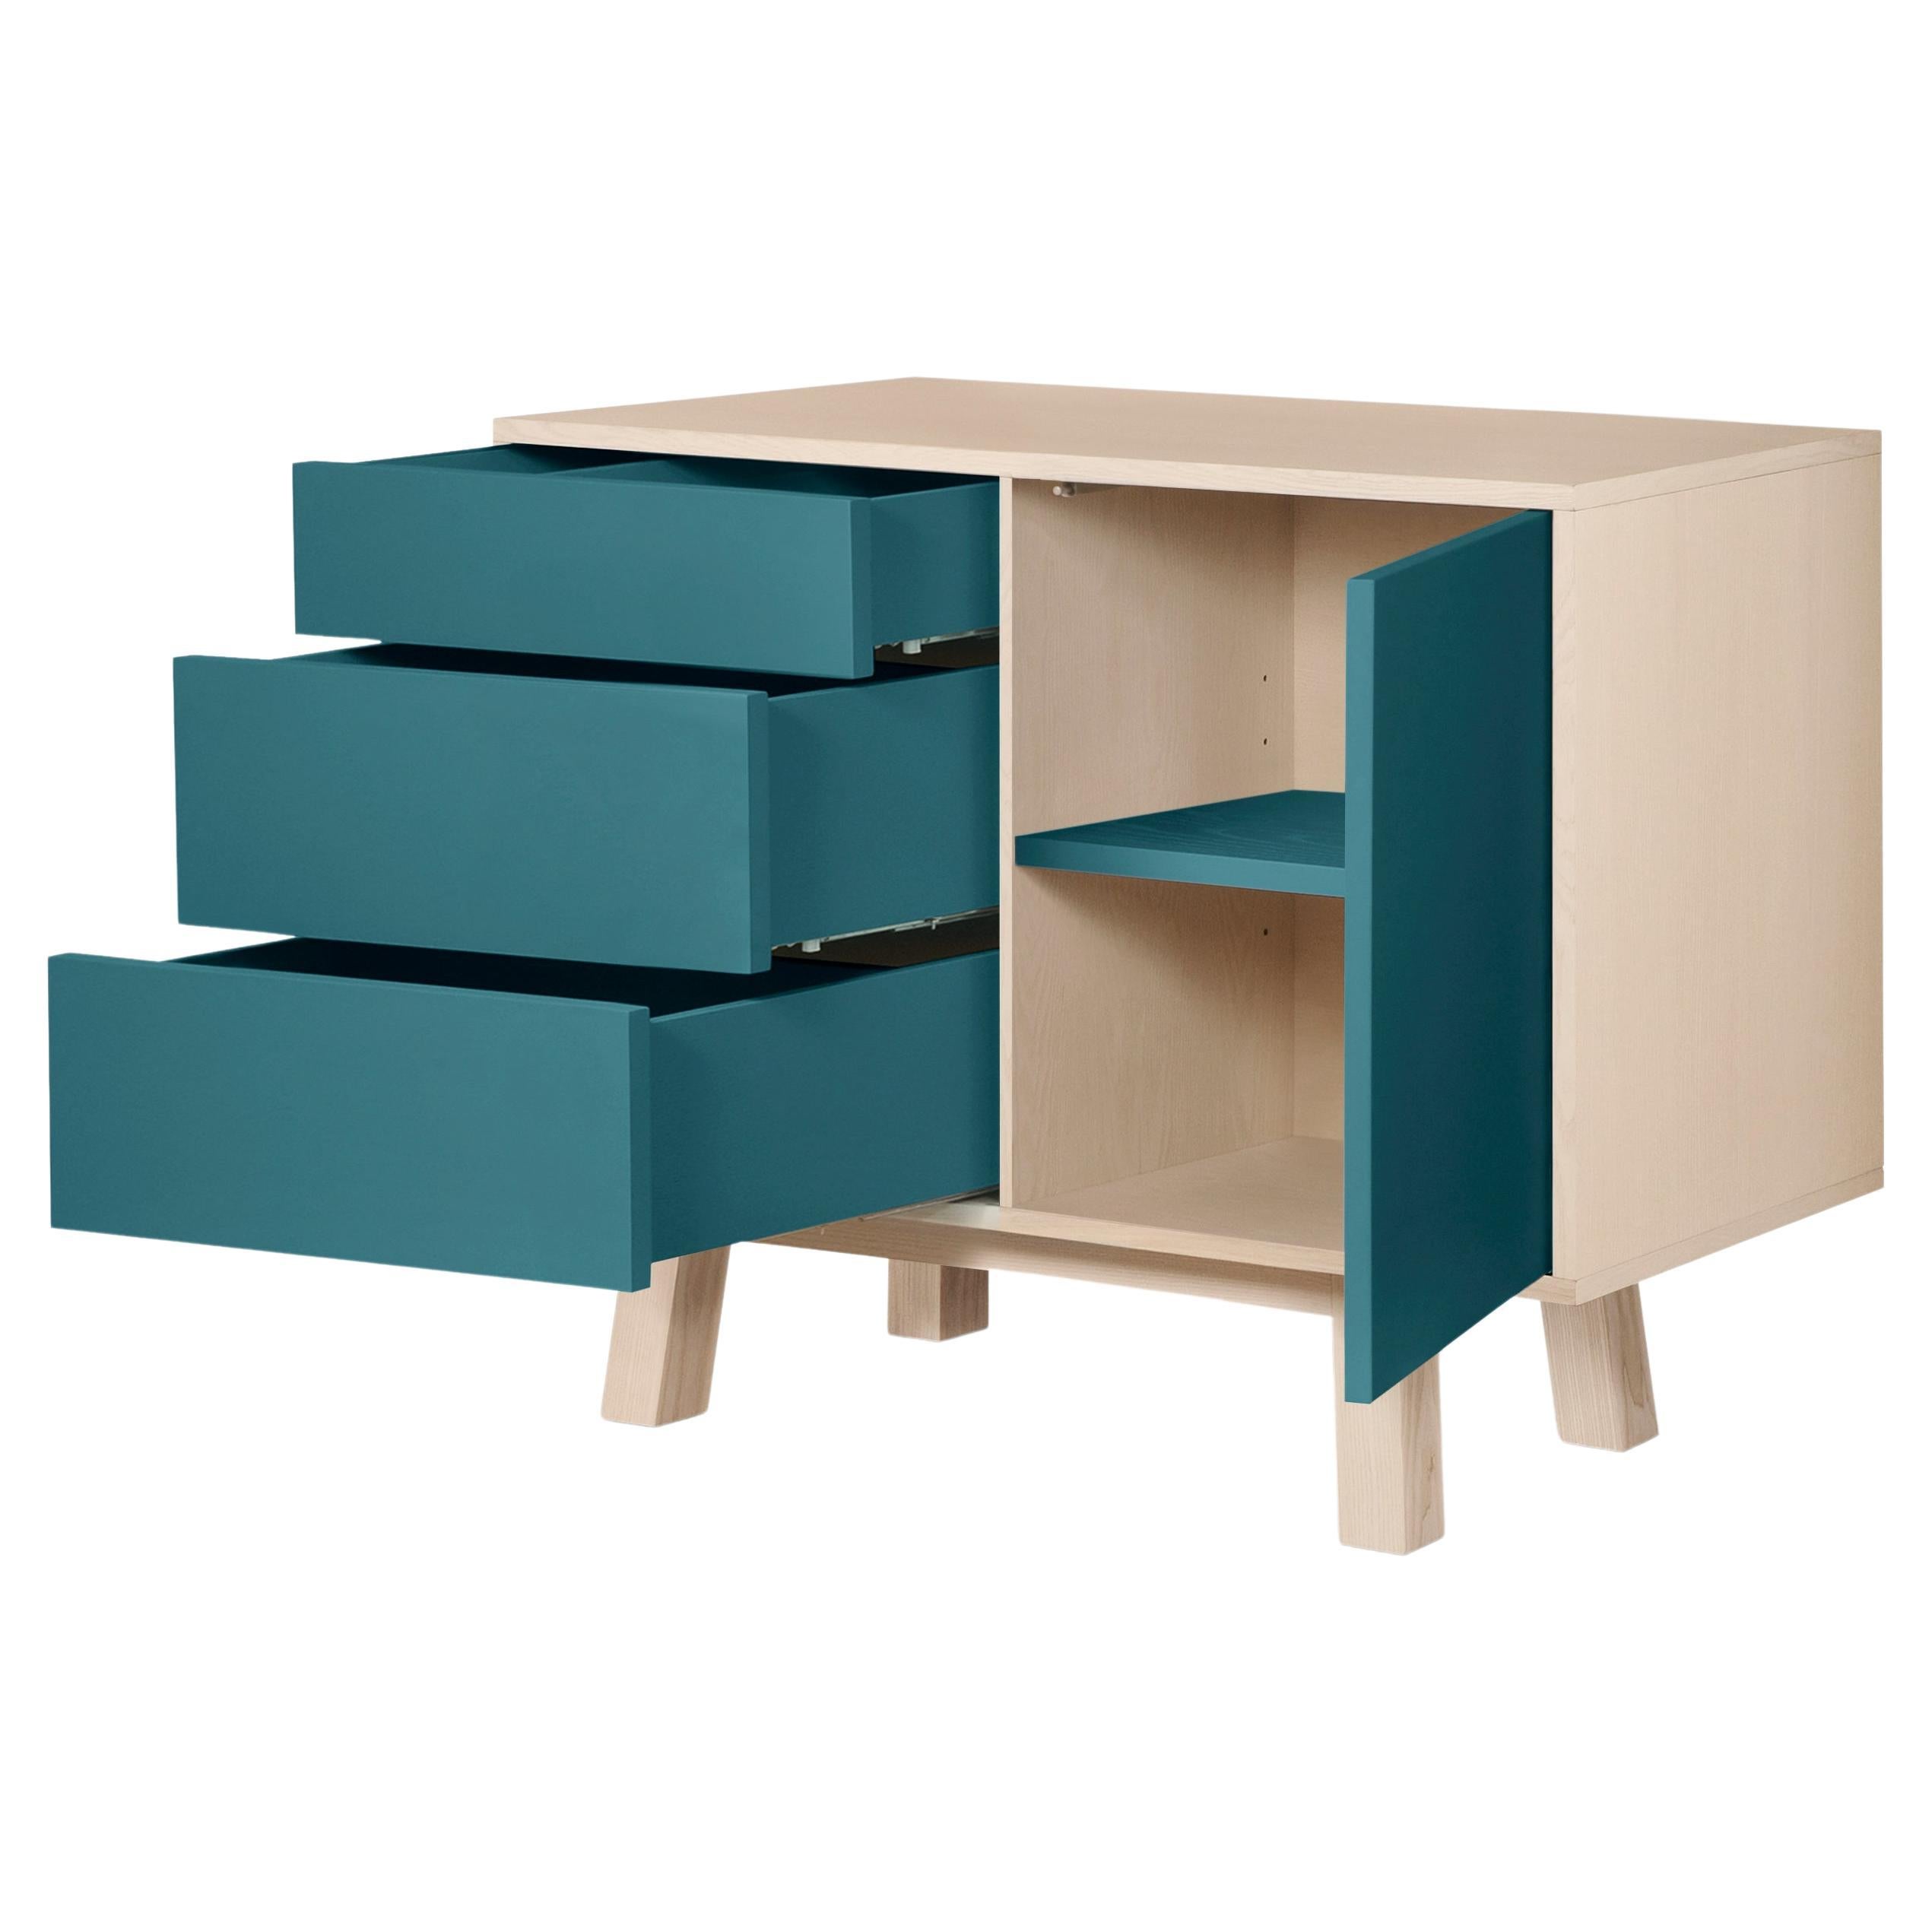 1-Door + 3-Drawer Low Sideboard, Design by Eric Gizard, Paris and Made in France